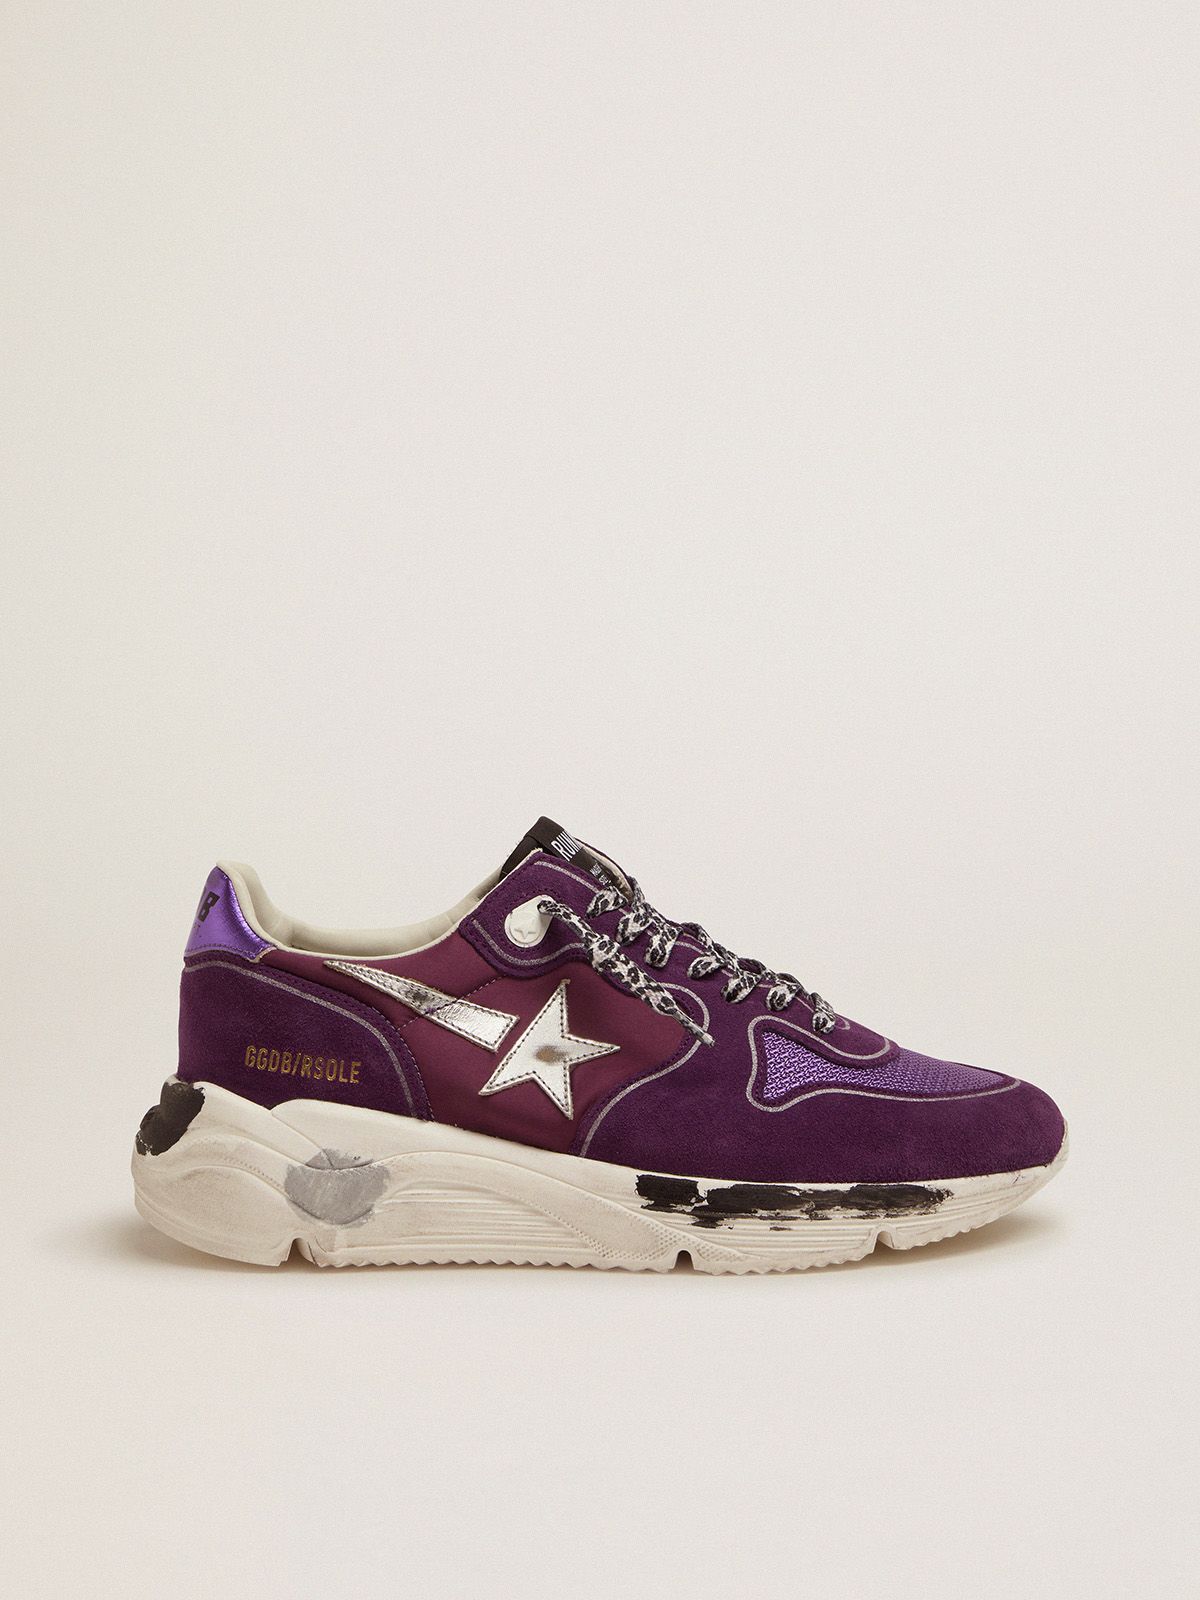 golden goose Sole purple leather and Running with heel mesh metallic tab Suede, sneakers